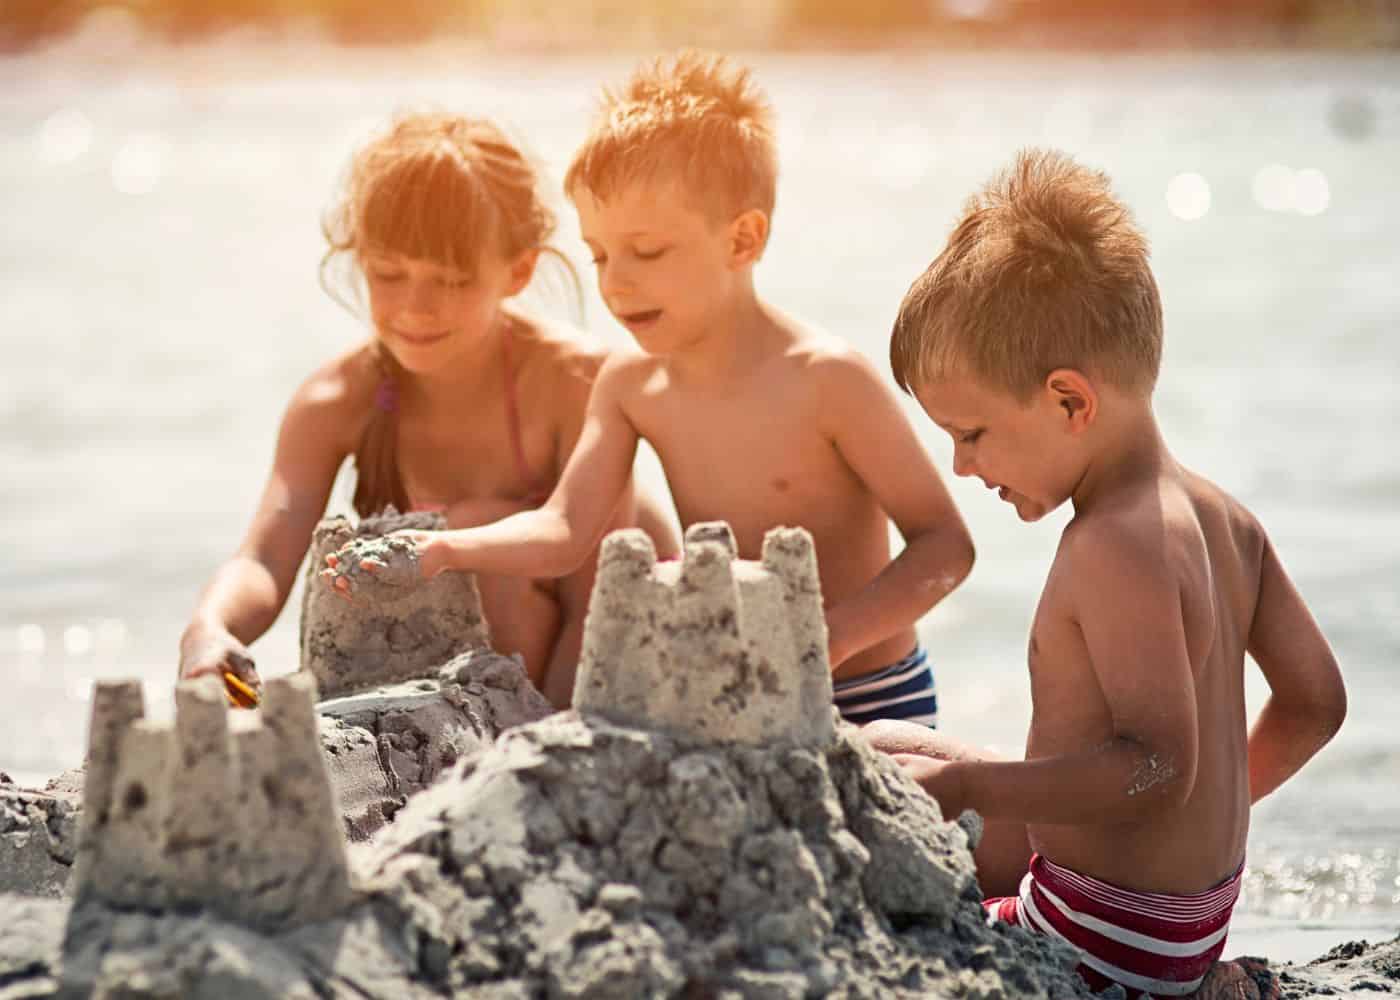 Kids at the beach working on a sand castle